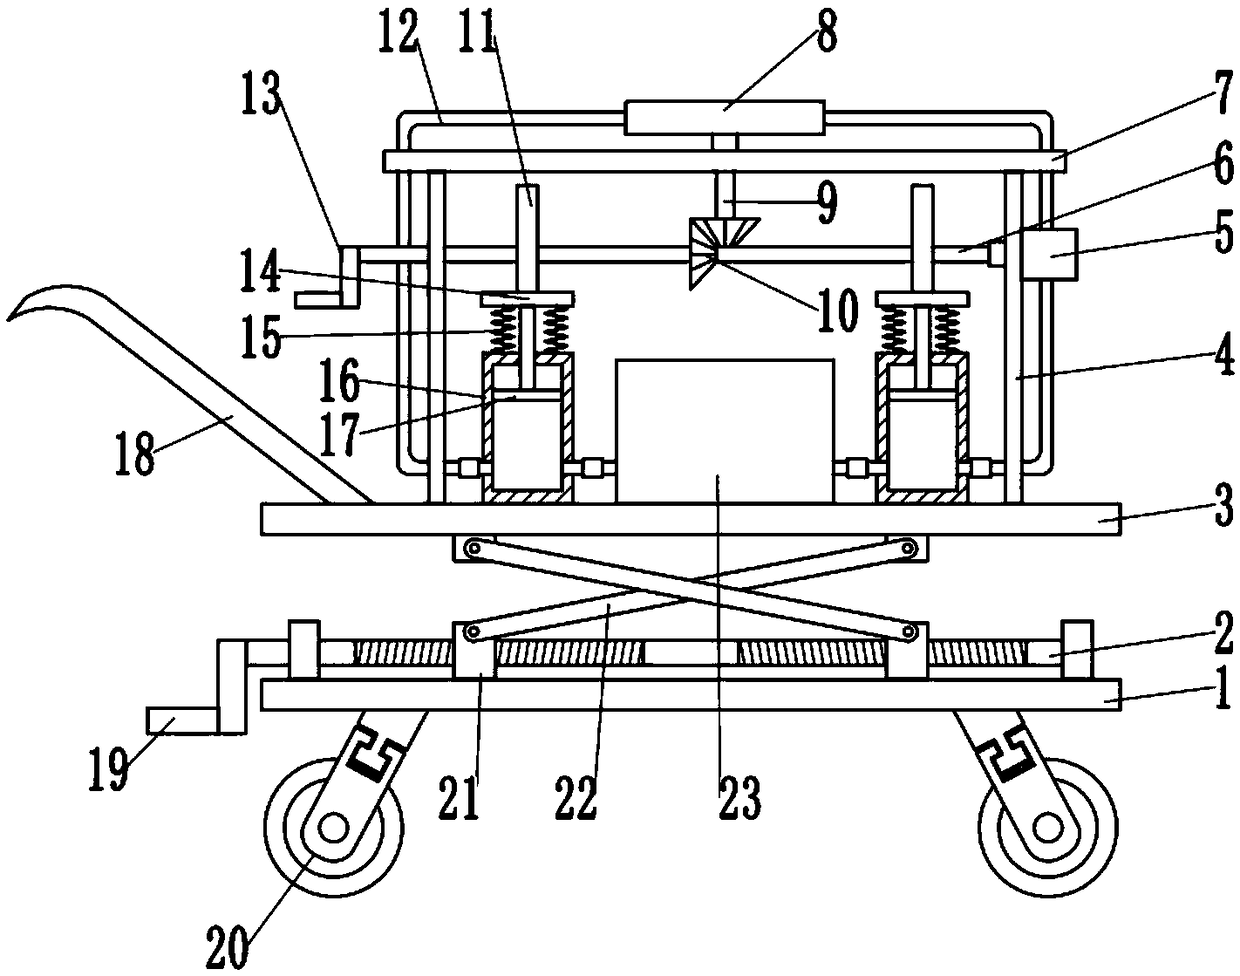 Manual integrated pesticide spraying device with adjustable range